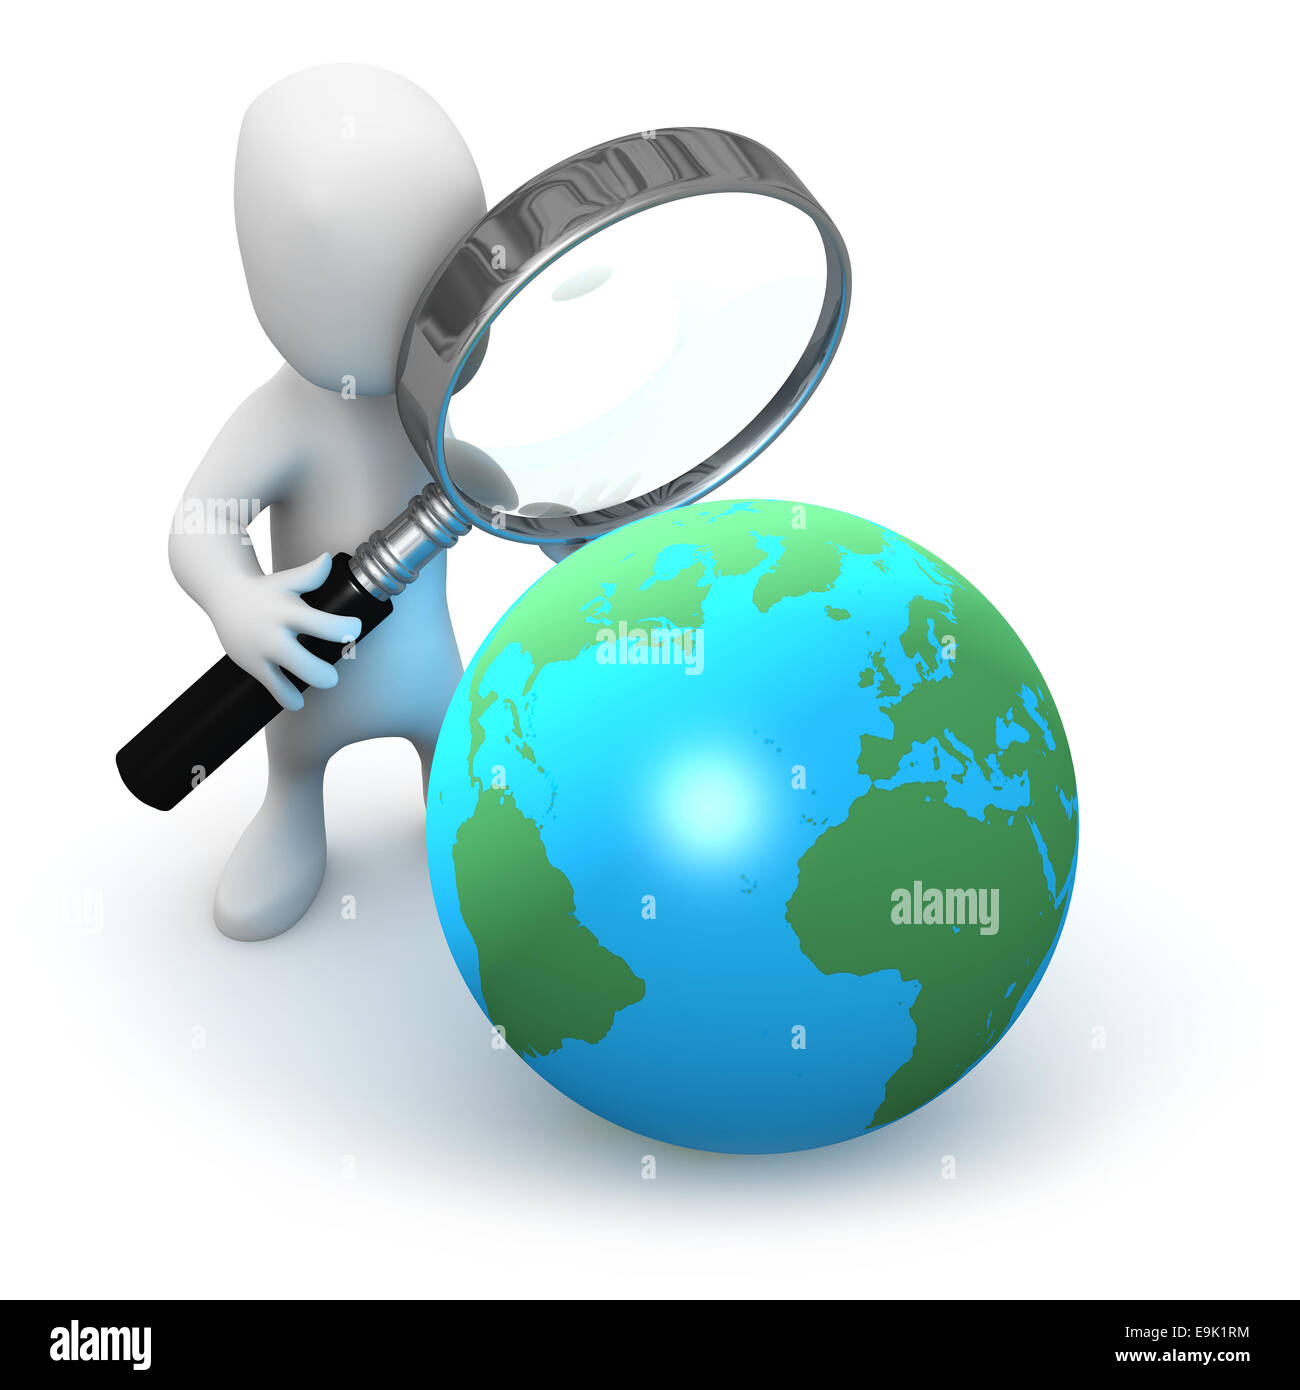 645,439 Magnifying Glass Images, Stock Photos, 3D objects